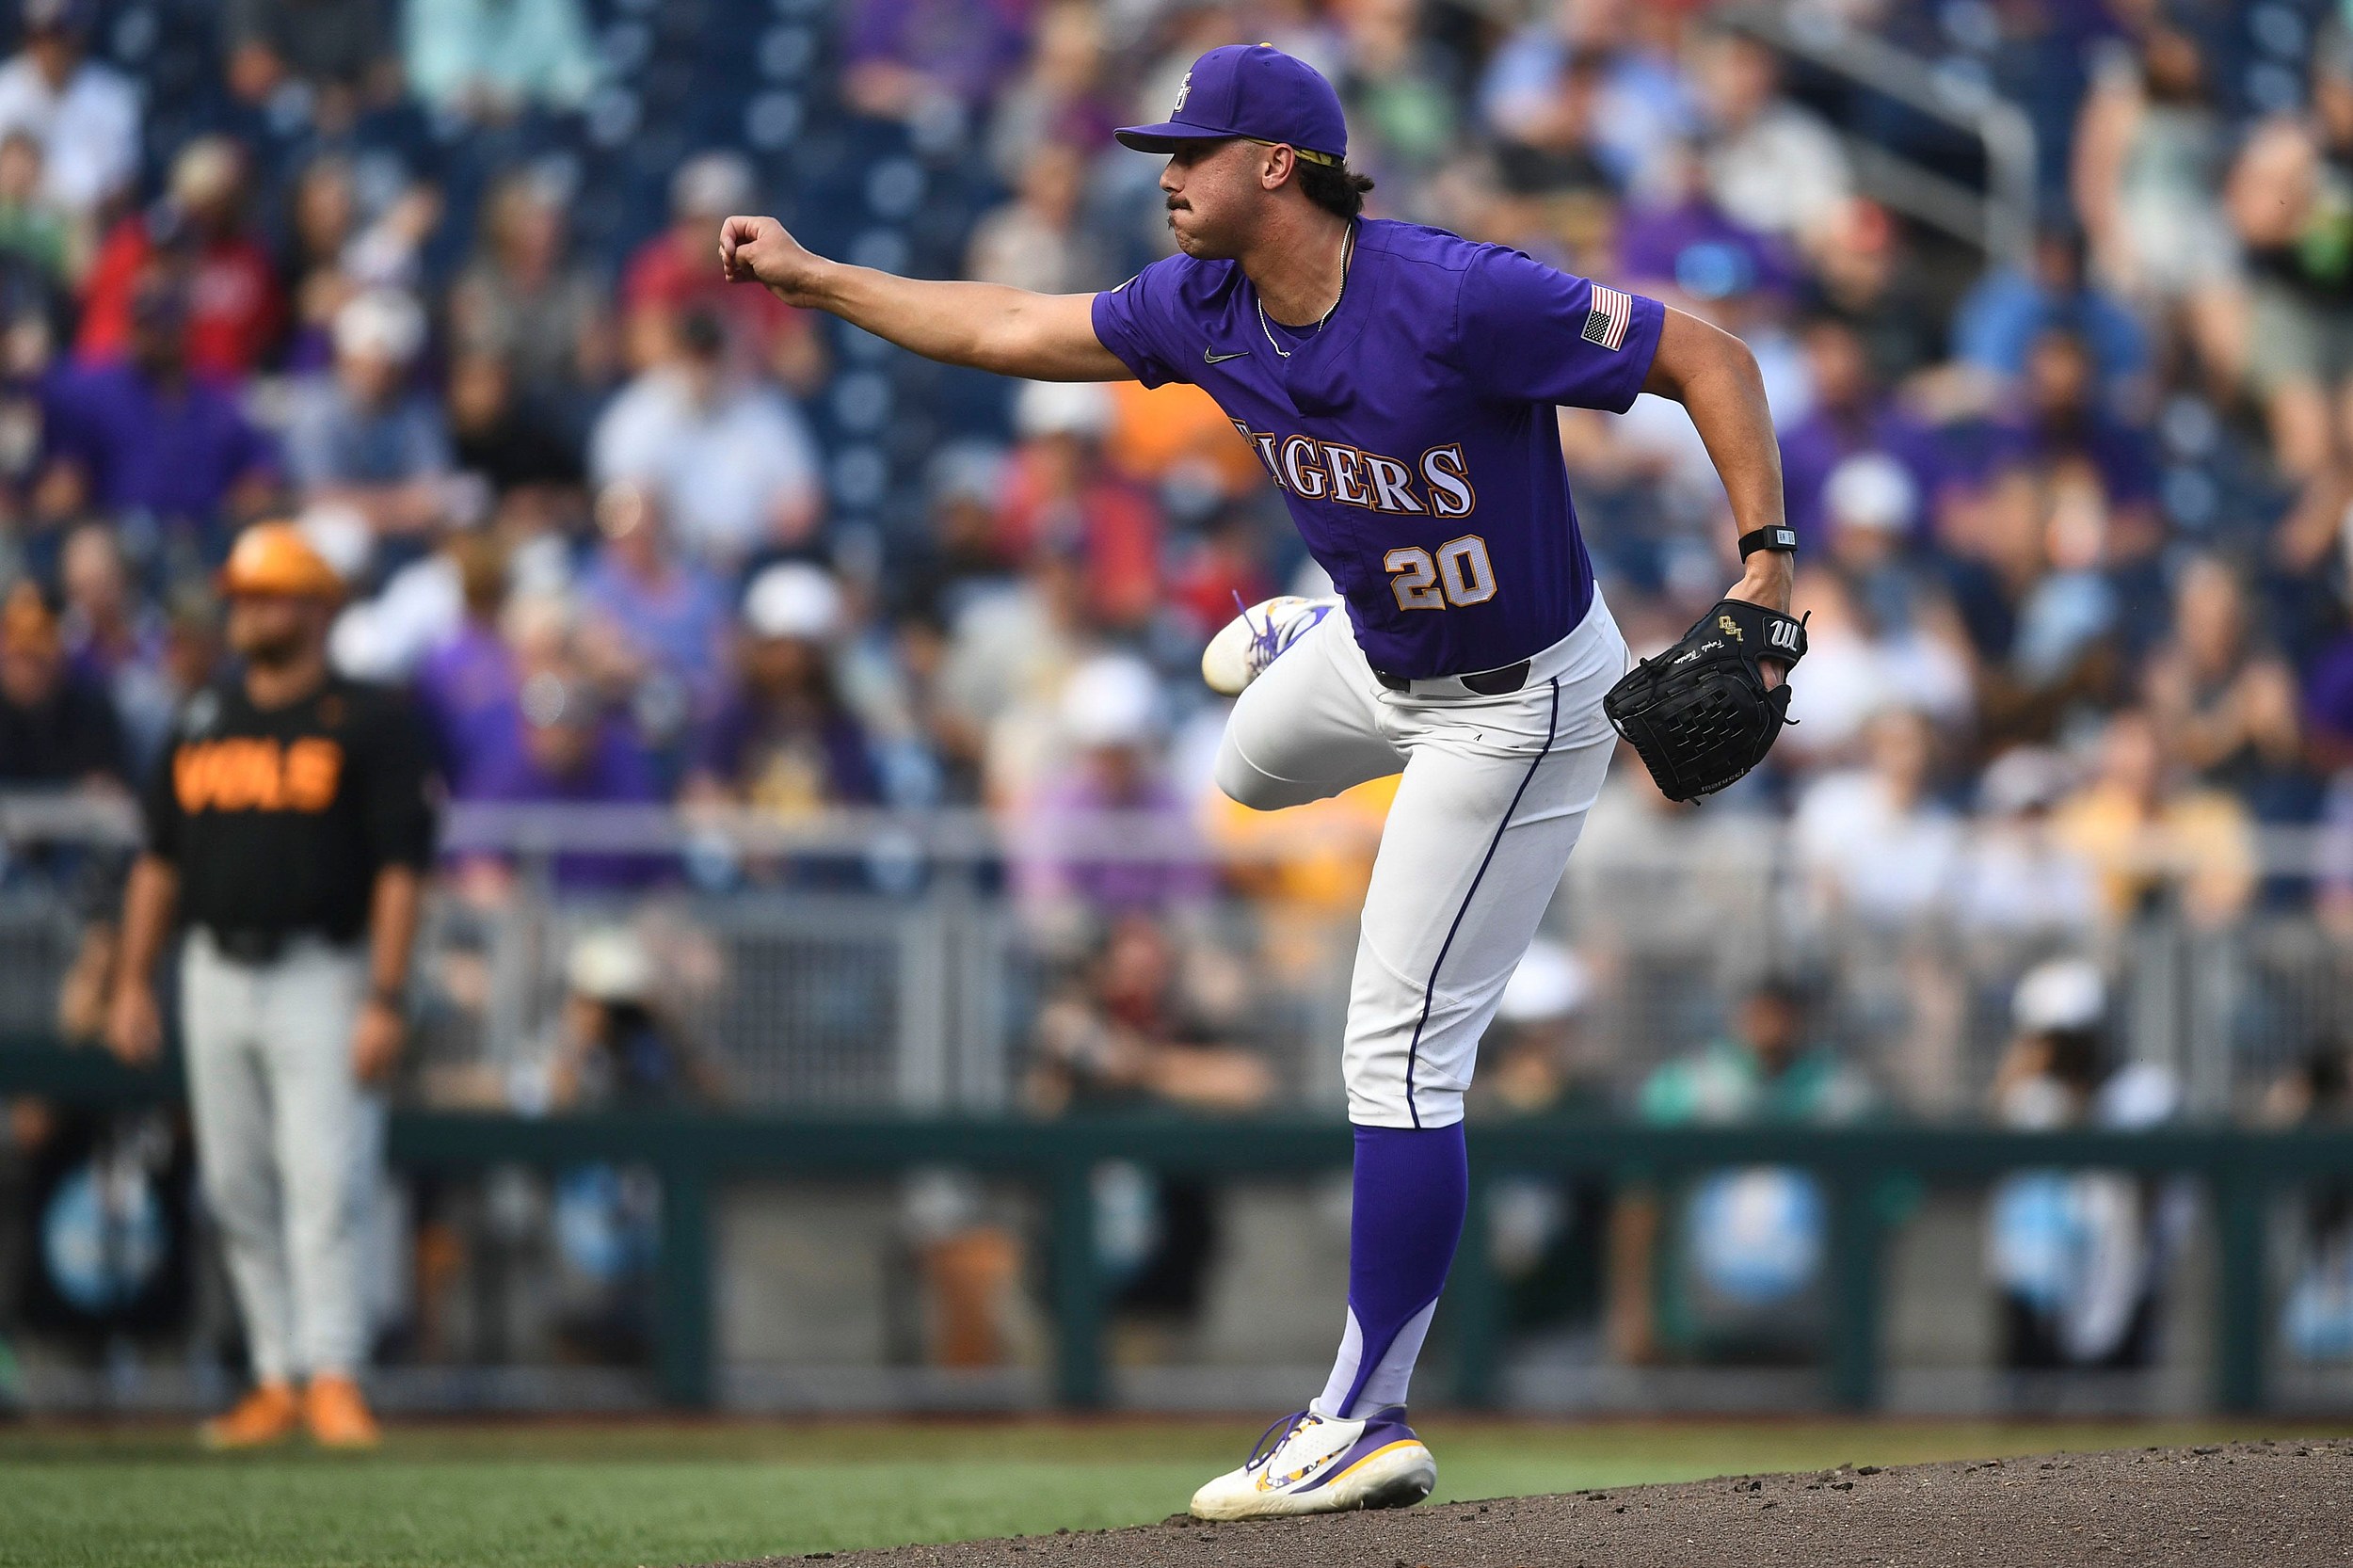 Nola Named National Pitcher of the Year – LSU